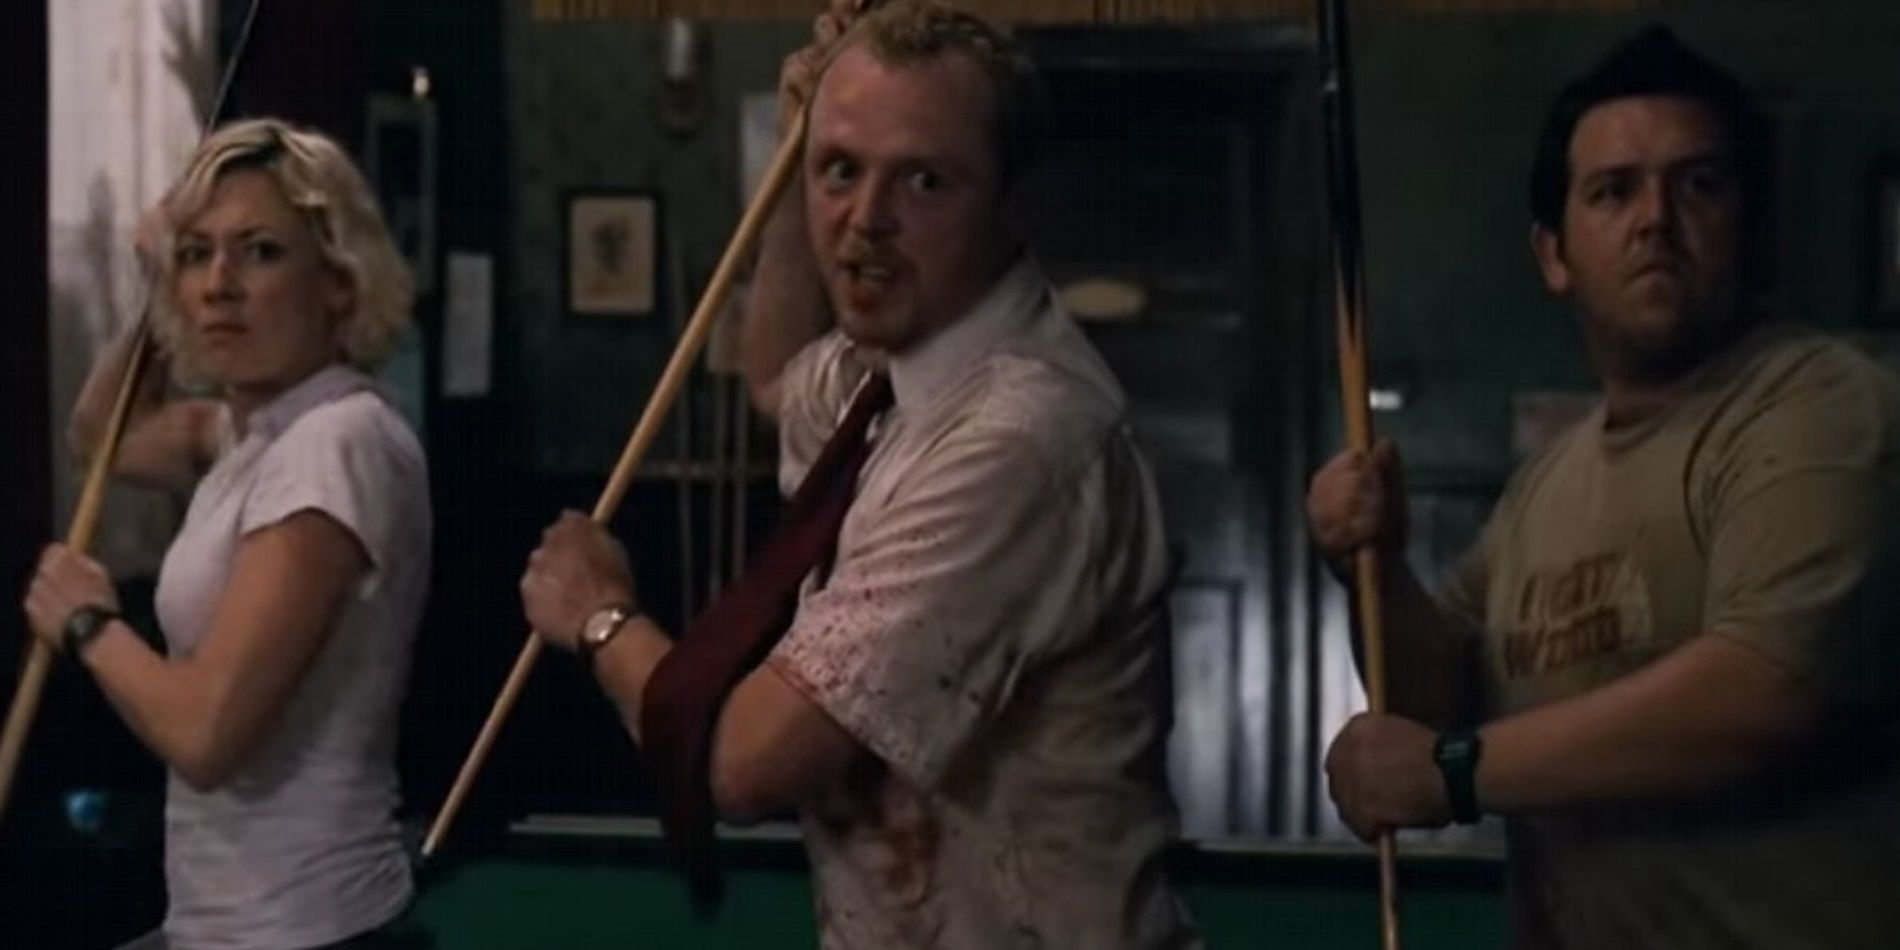 Shaun, Ed, and Liz with pool cues in Shaun of the Dead